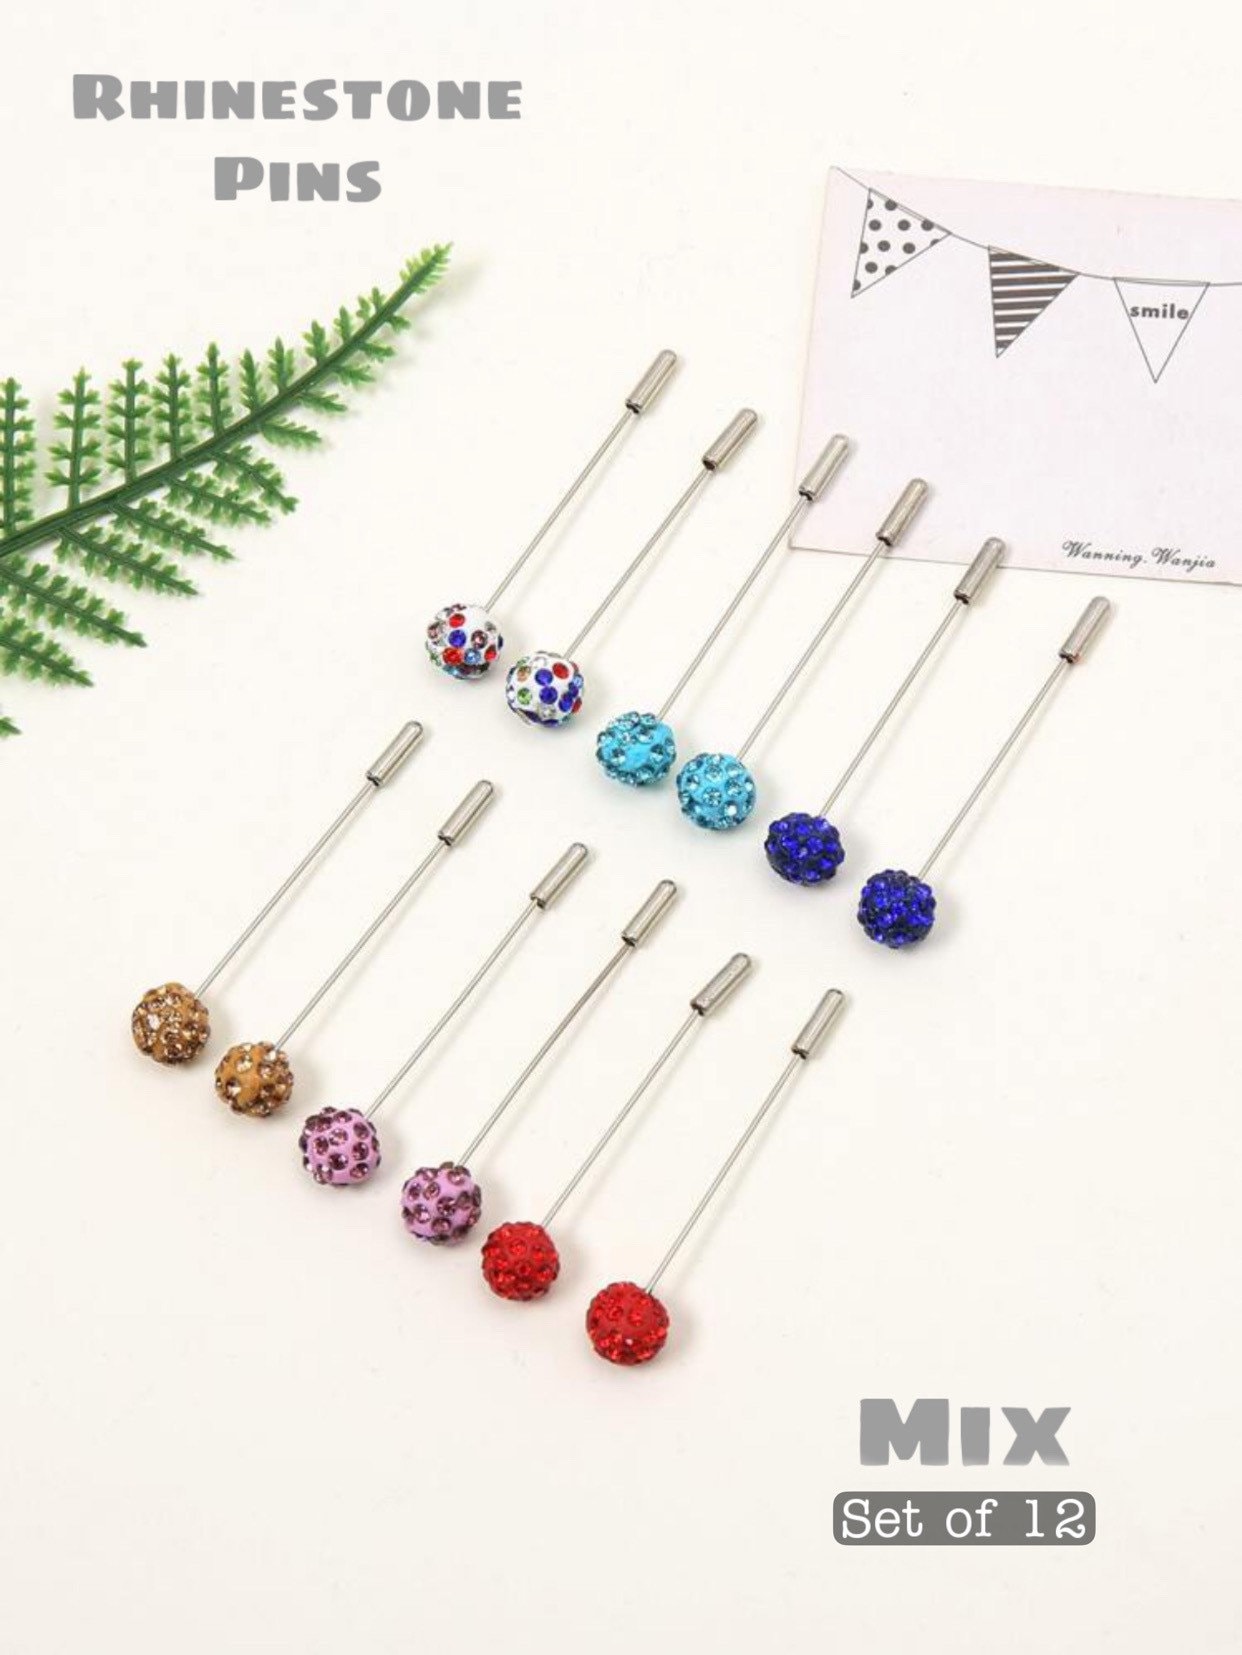 TRUSTED TRADE Hijab pins/Scarf pins/Stole pin/Brooch Muliple American  Diamond studded Round Bead design model in variant colours in a 30 pcs disk  pack Beautiful Hijab pins/ Scarf pins/Stole pins Brooch Brooch Price